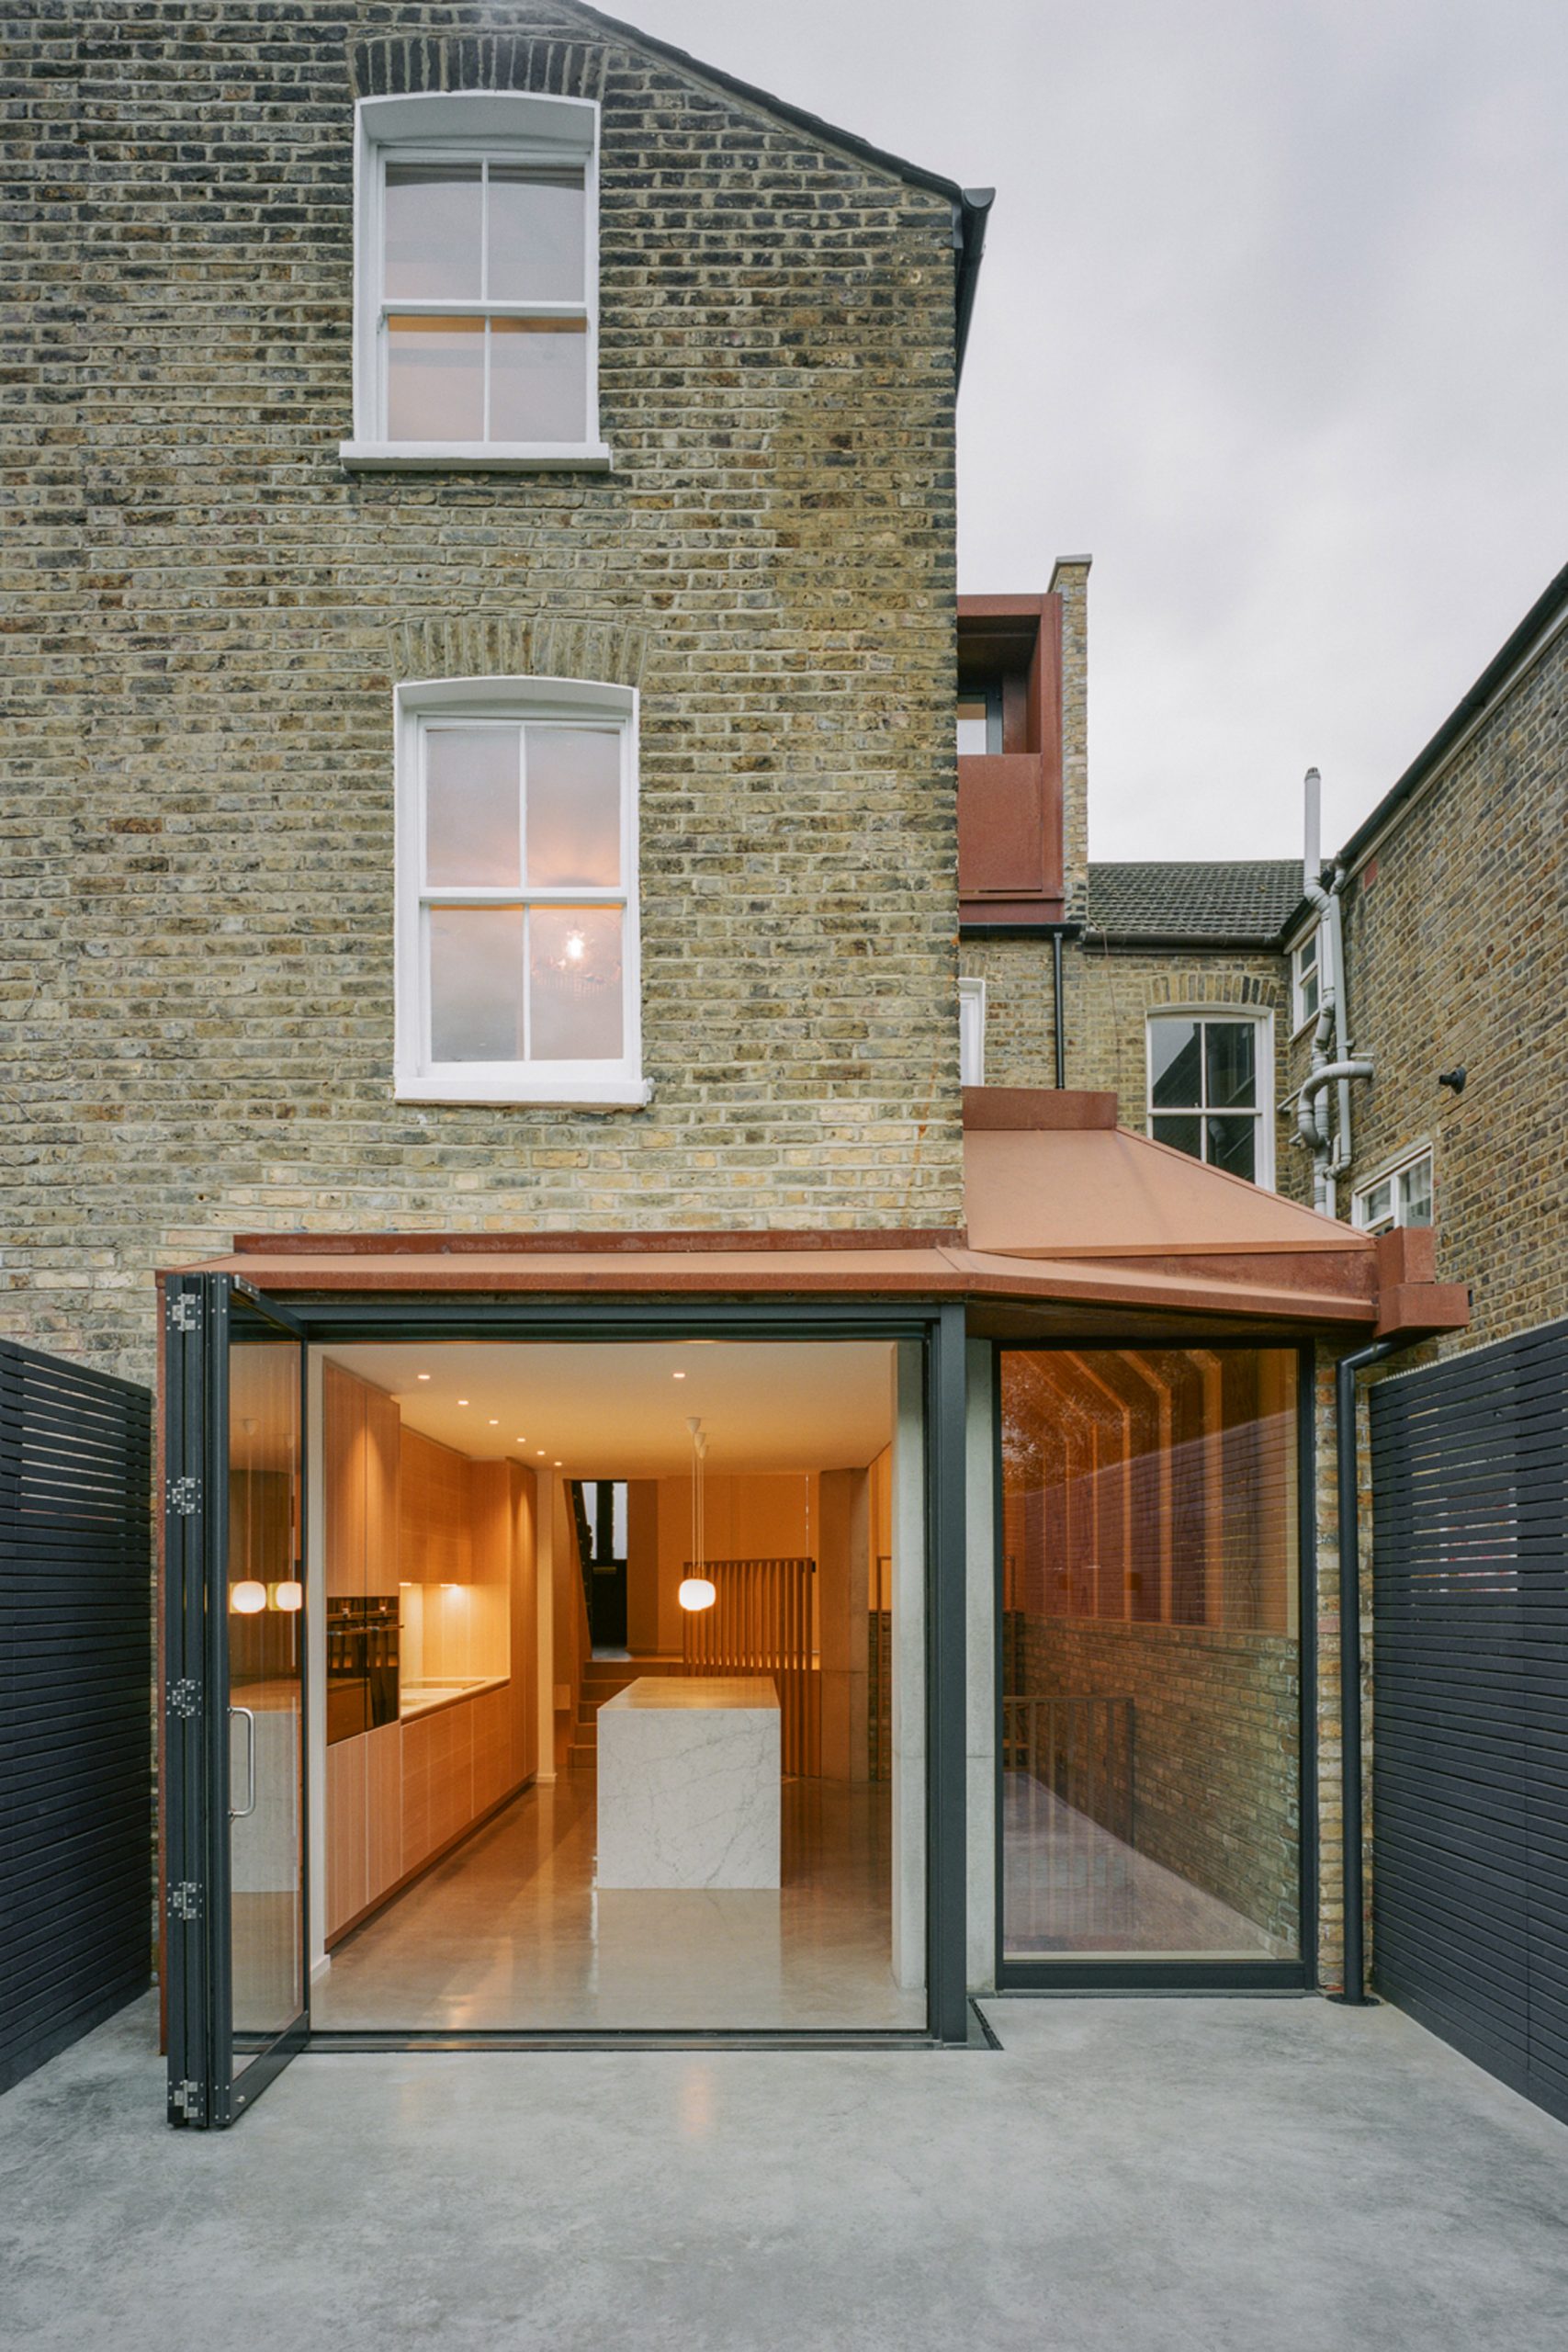 Matthew Giles Architects designed the project